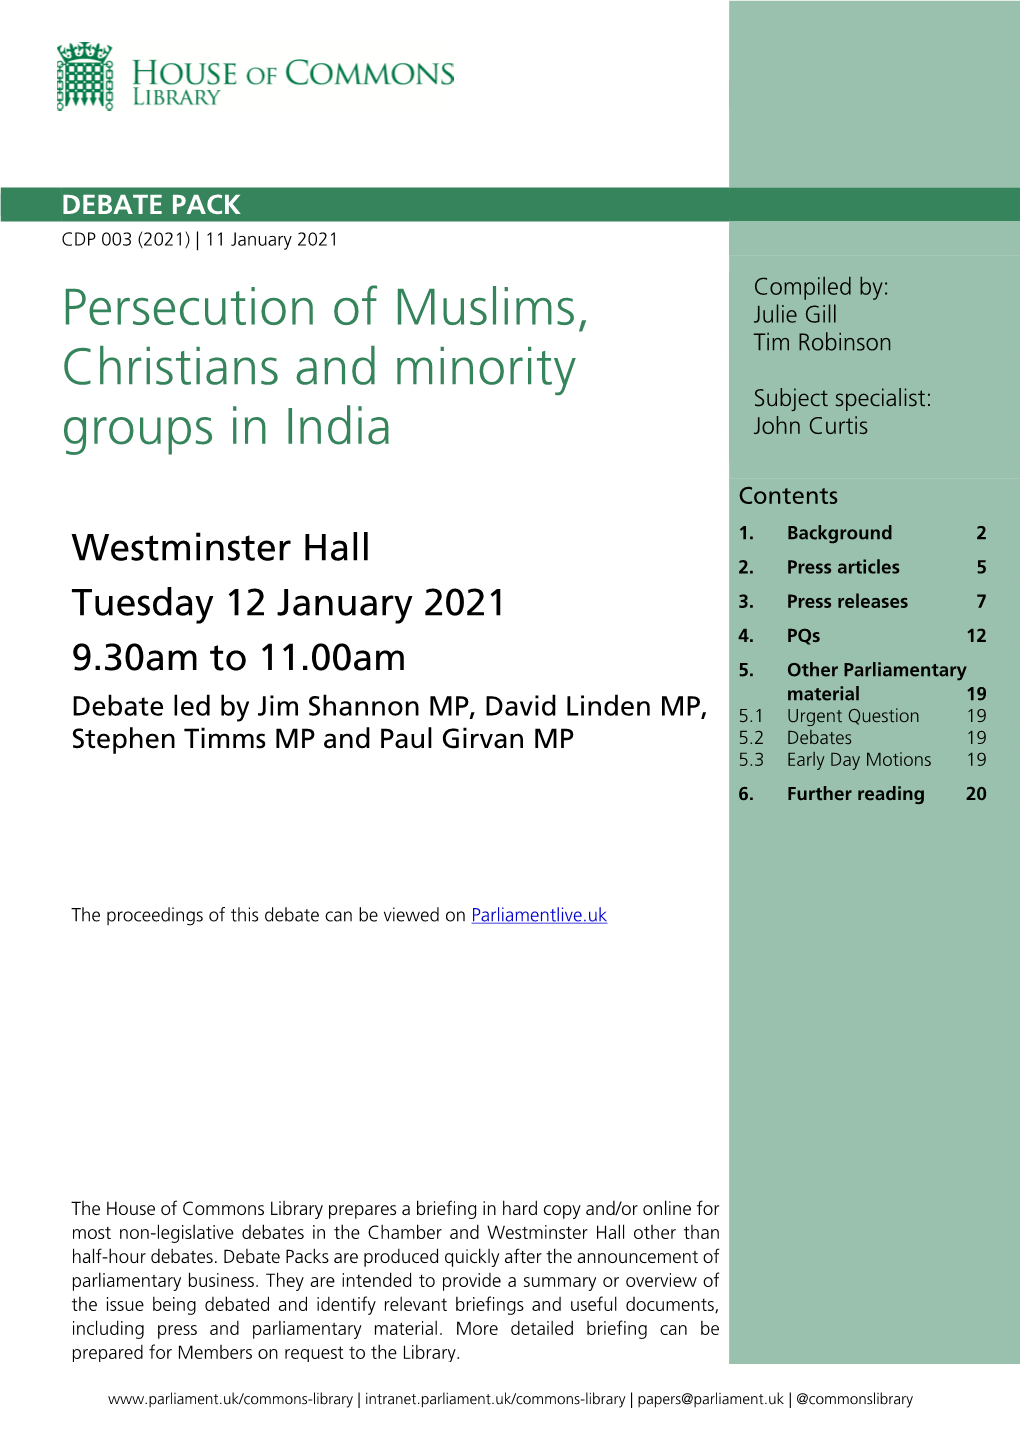 Persecution of Muslims, Christians and Minority Groups in India 3